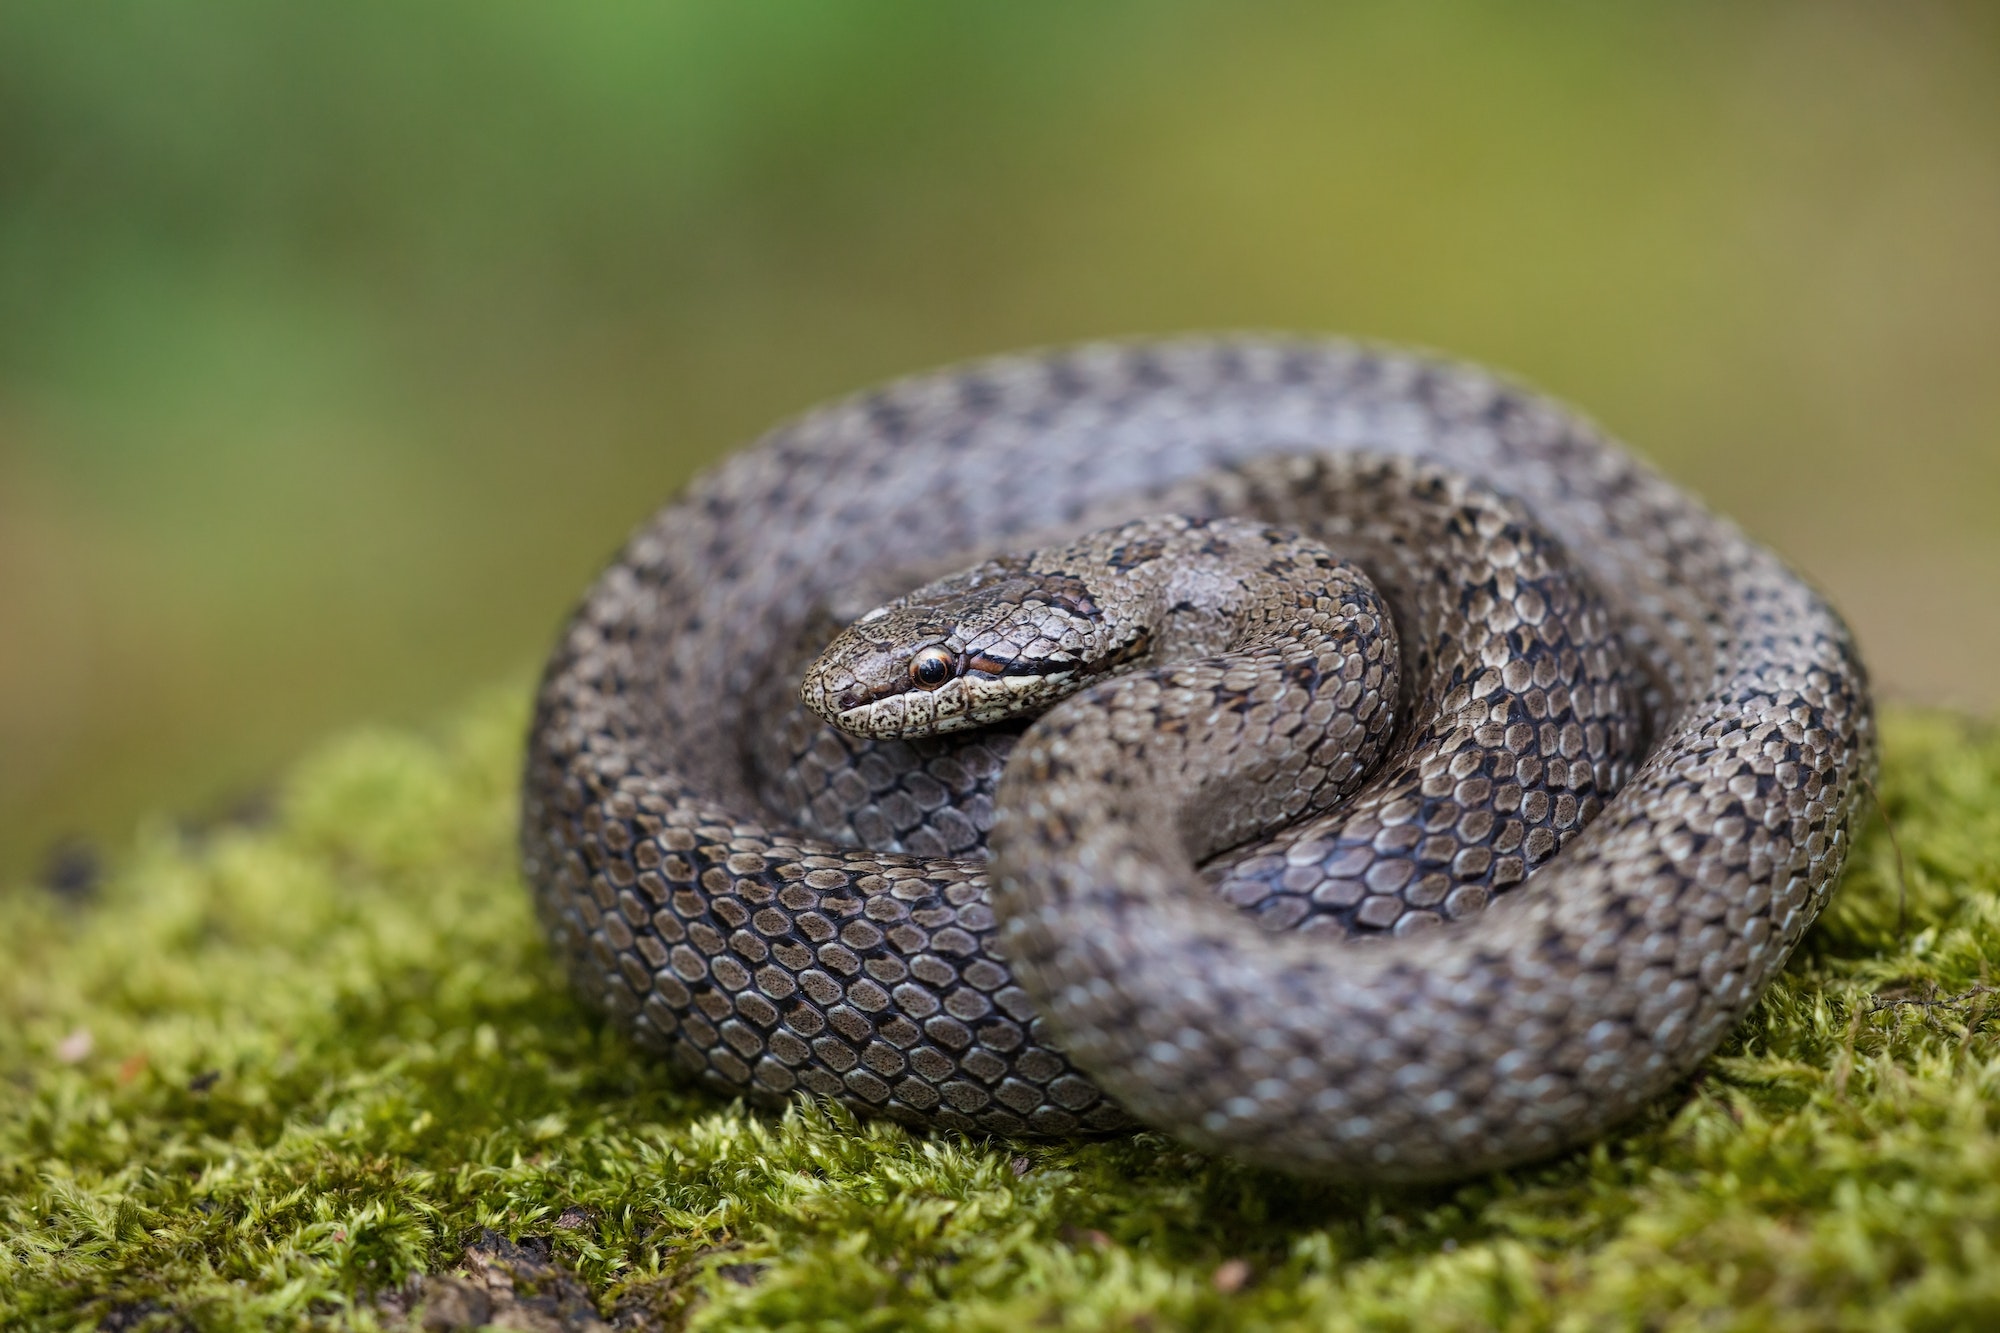 Textured dice snake basking on green ground with blurred background